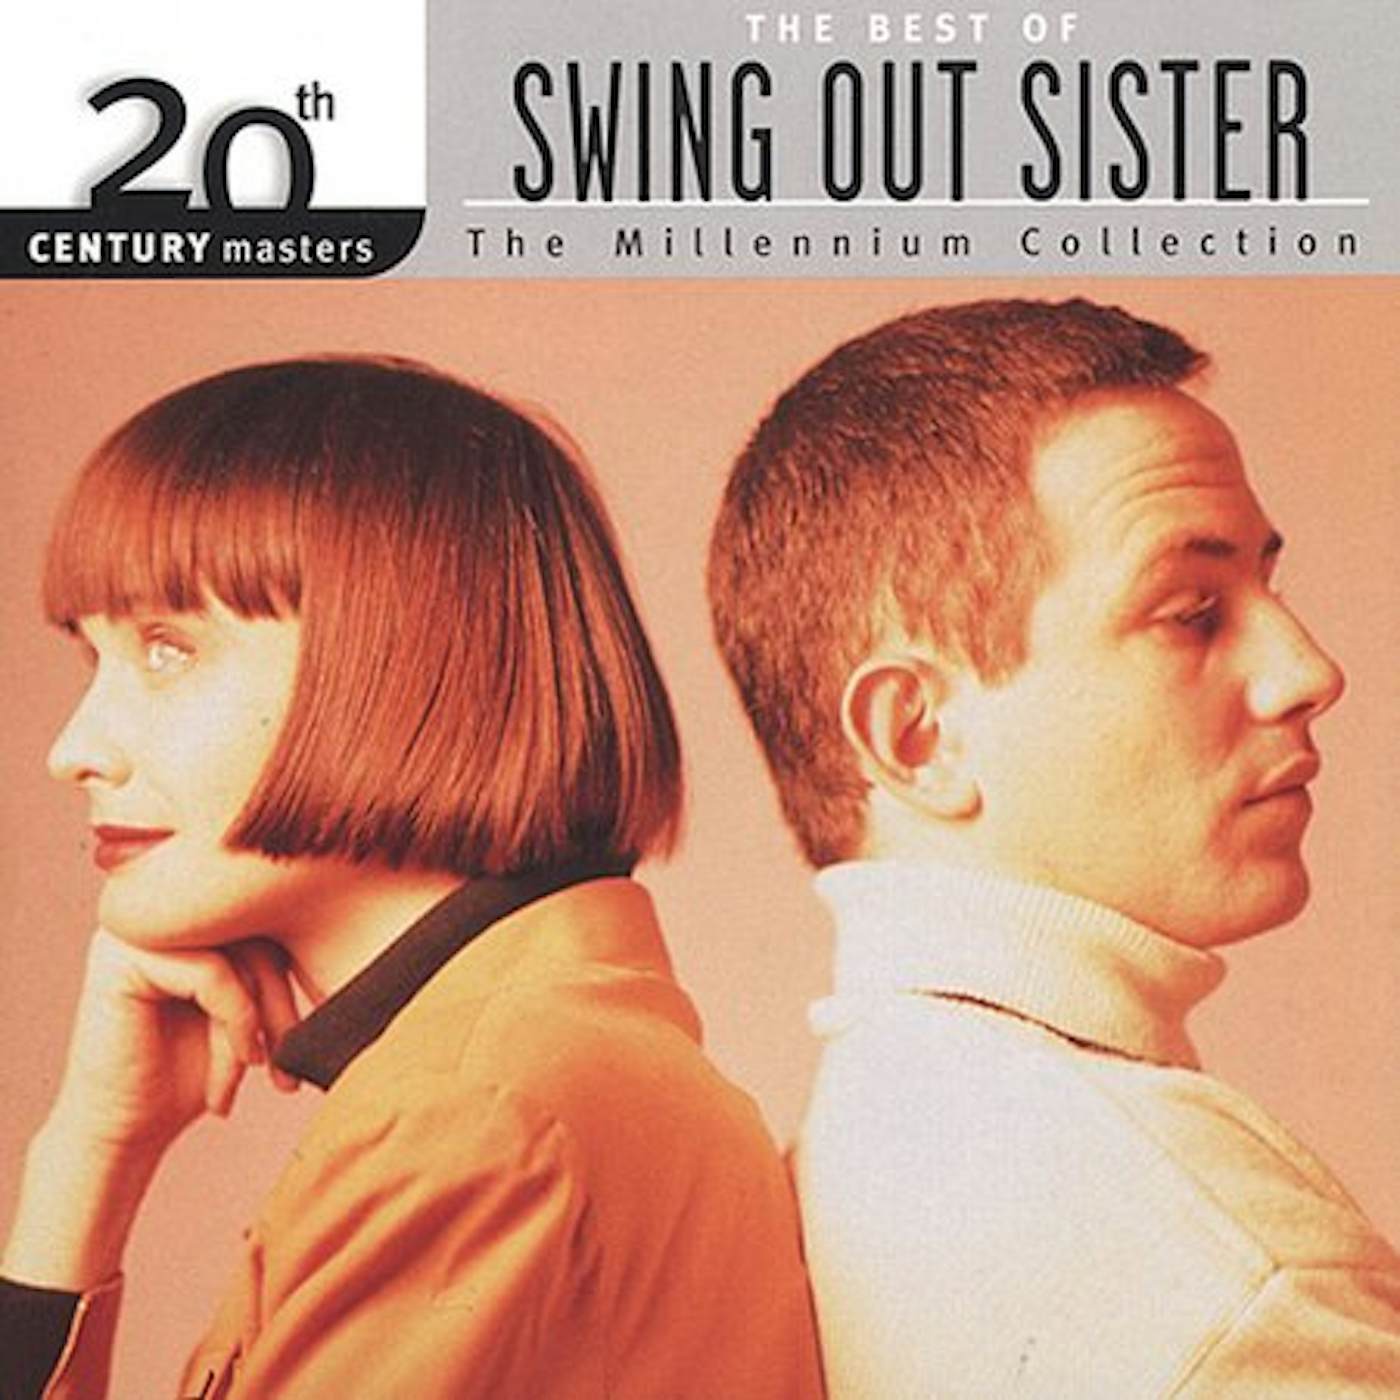 Swing Out Sister 20TH CENTURY MASTERS: MILLENNIUM COLLECTION CD